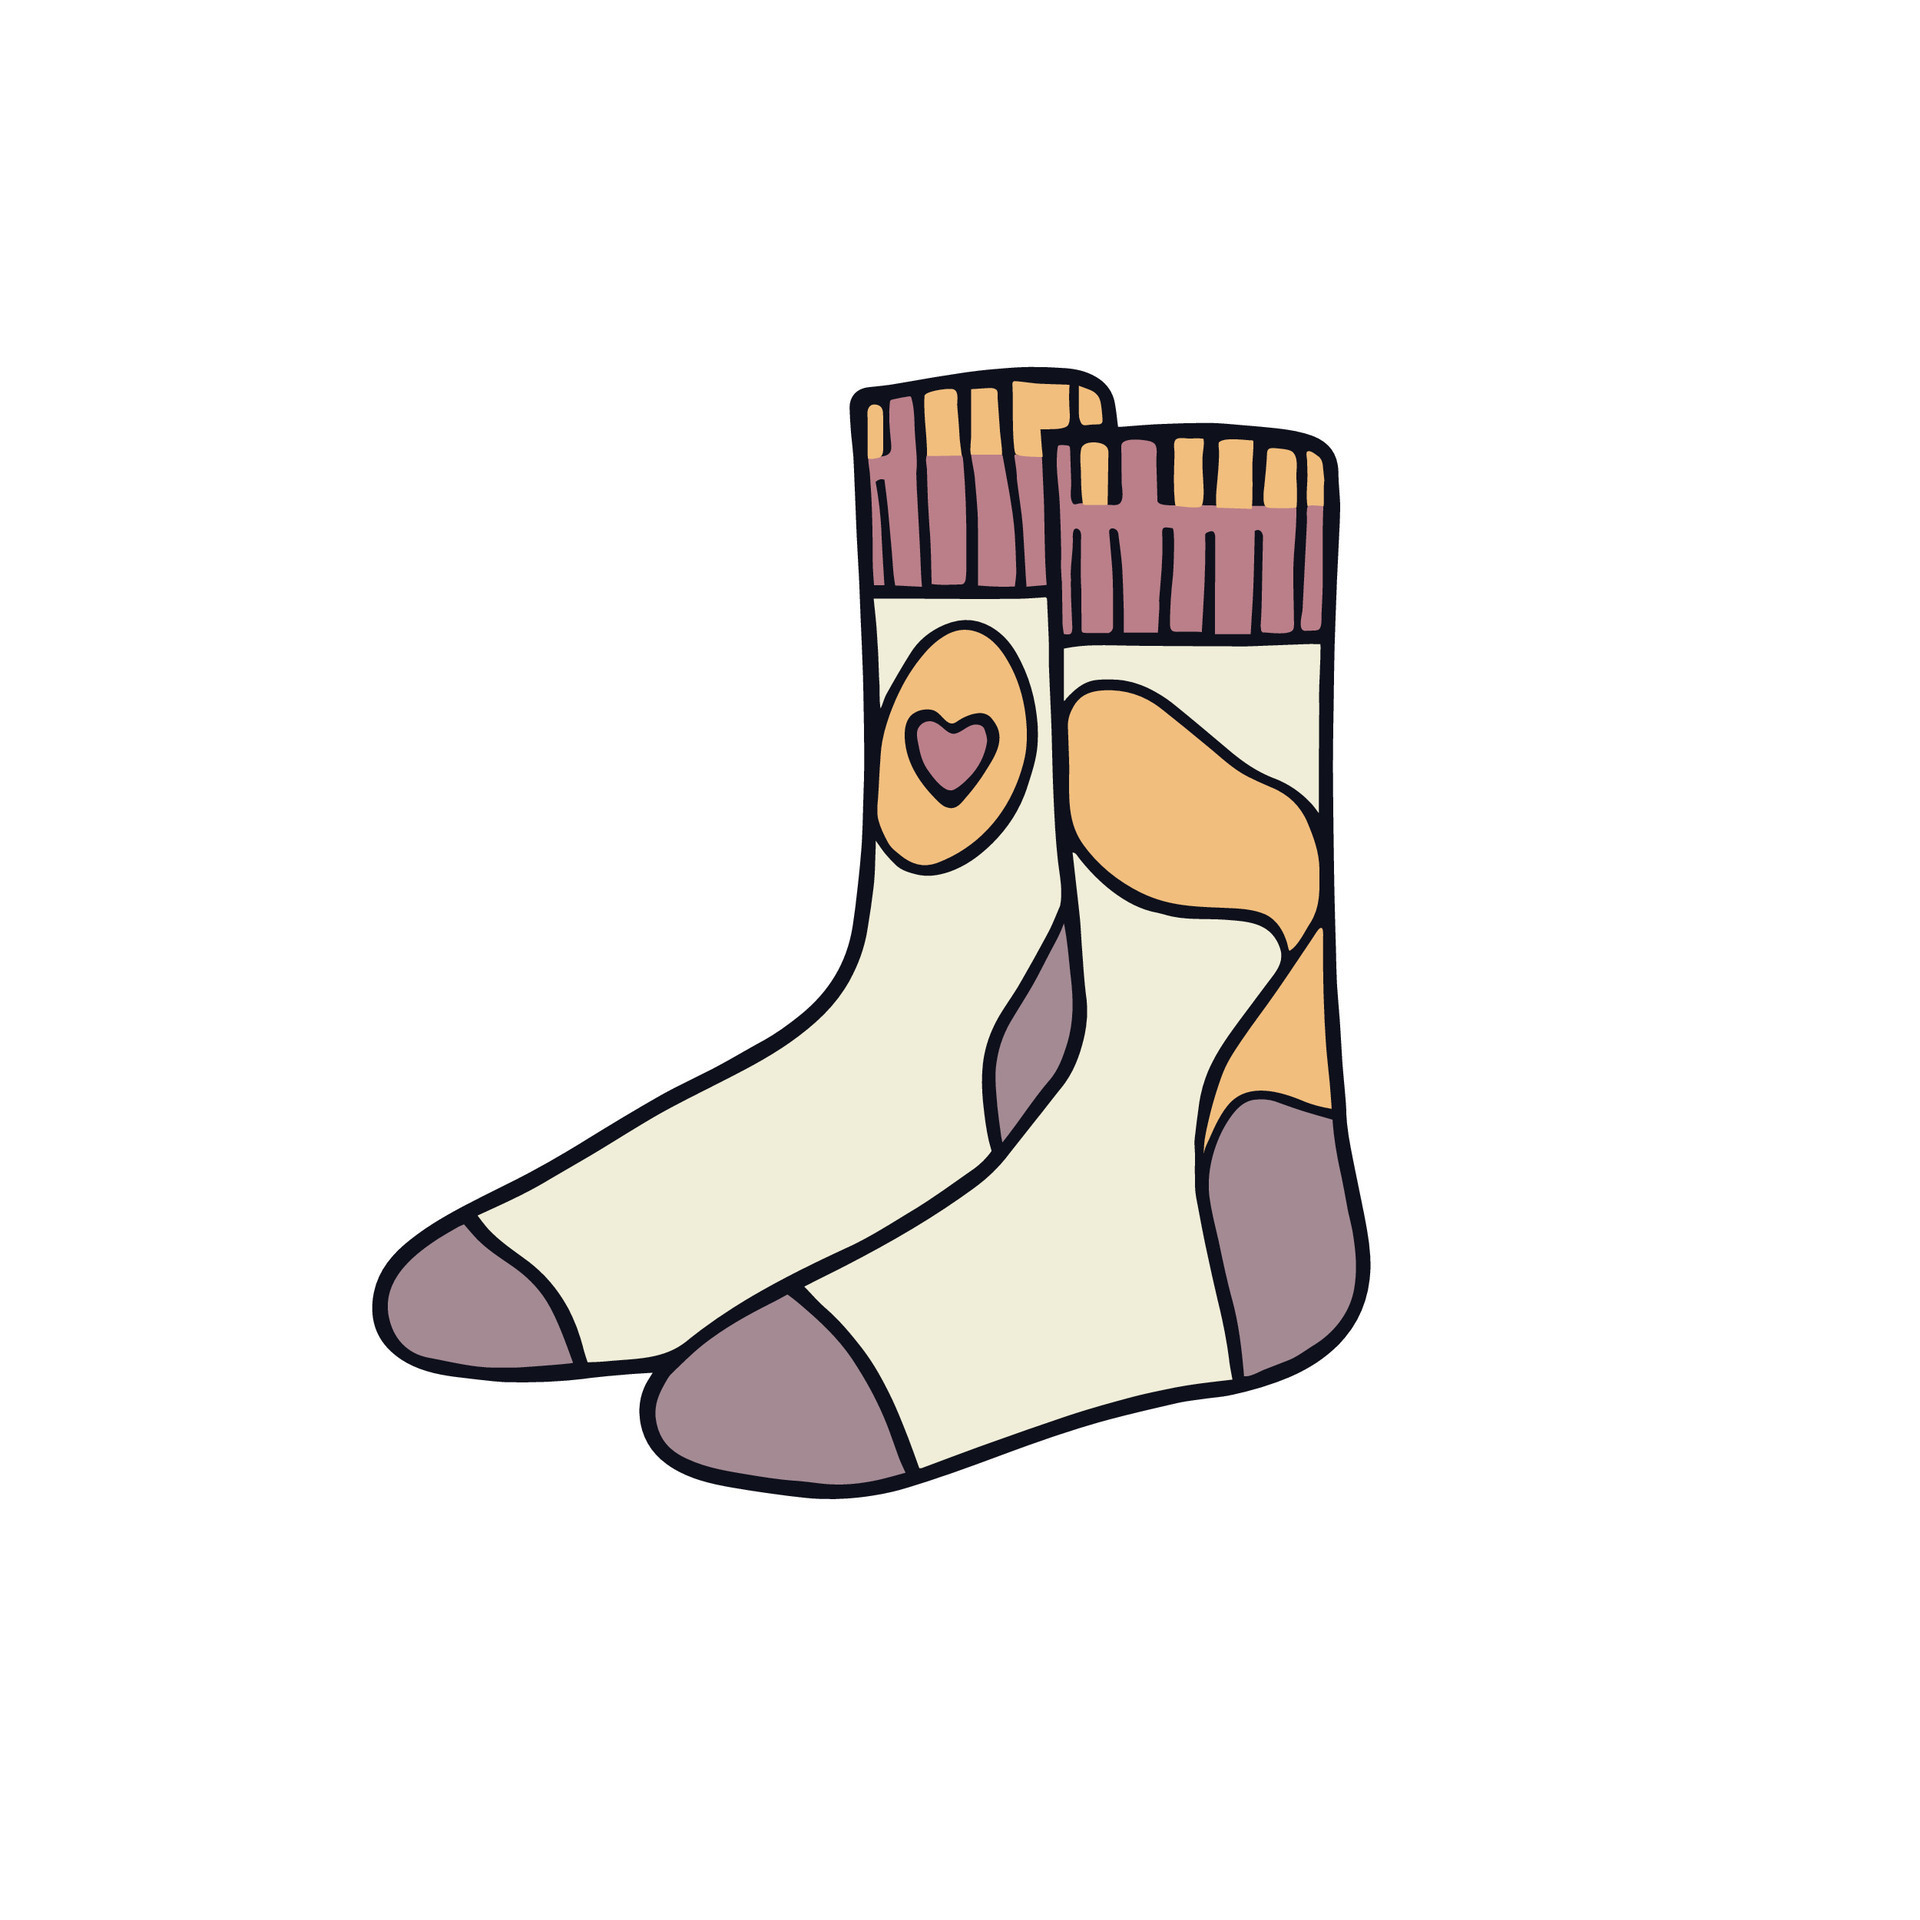 https://static.vecteezy.com/system/resources/previews/027/570/836/original/get-cozy-with-this-charming-illustration-of-a-socks-couple-a-perfect-match-for-comfort-and-warmth-embrace-togetherness-vector.jpg